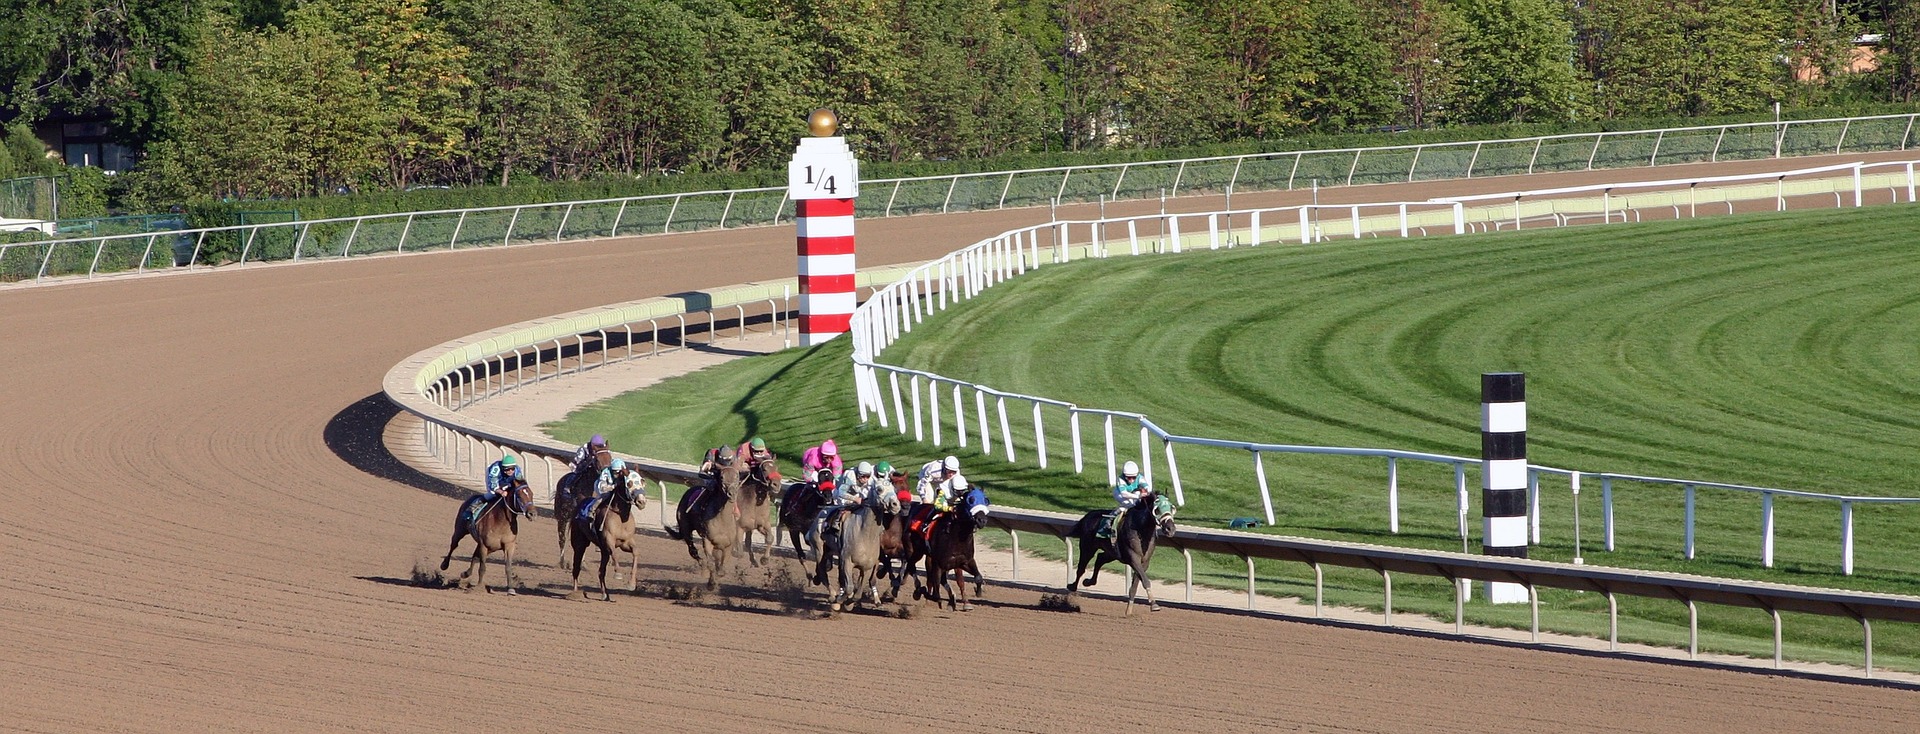 Off track betting simulcast horse racing